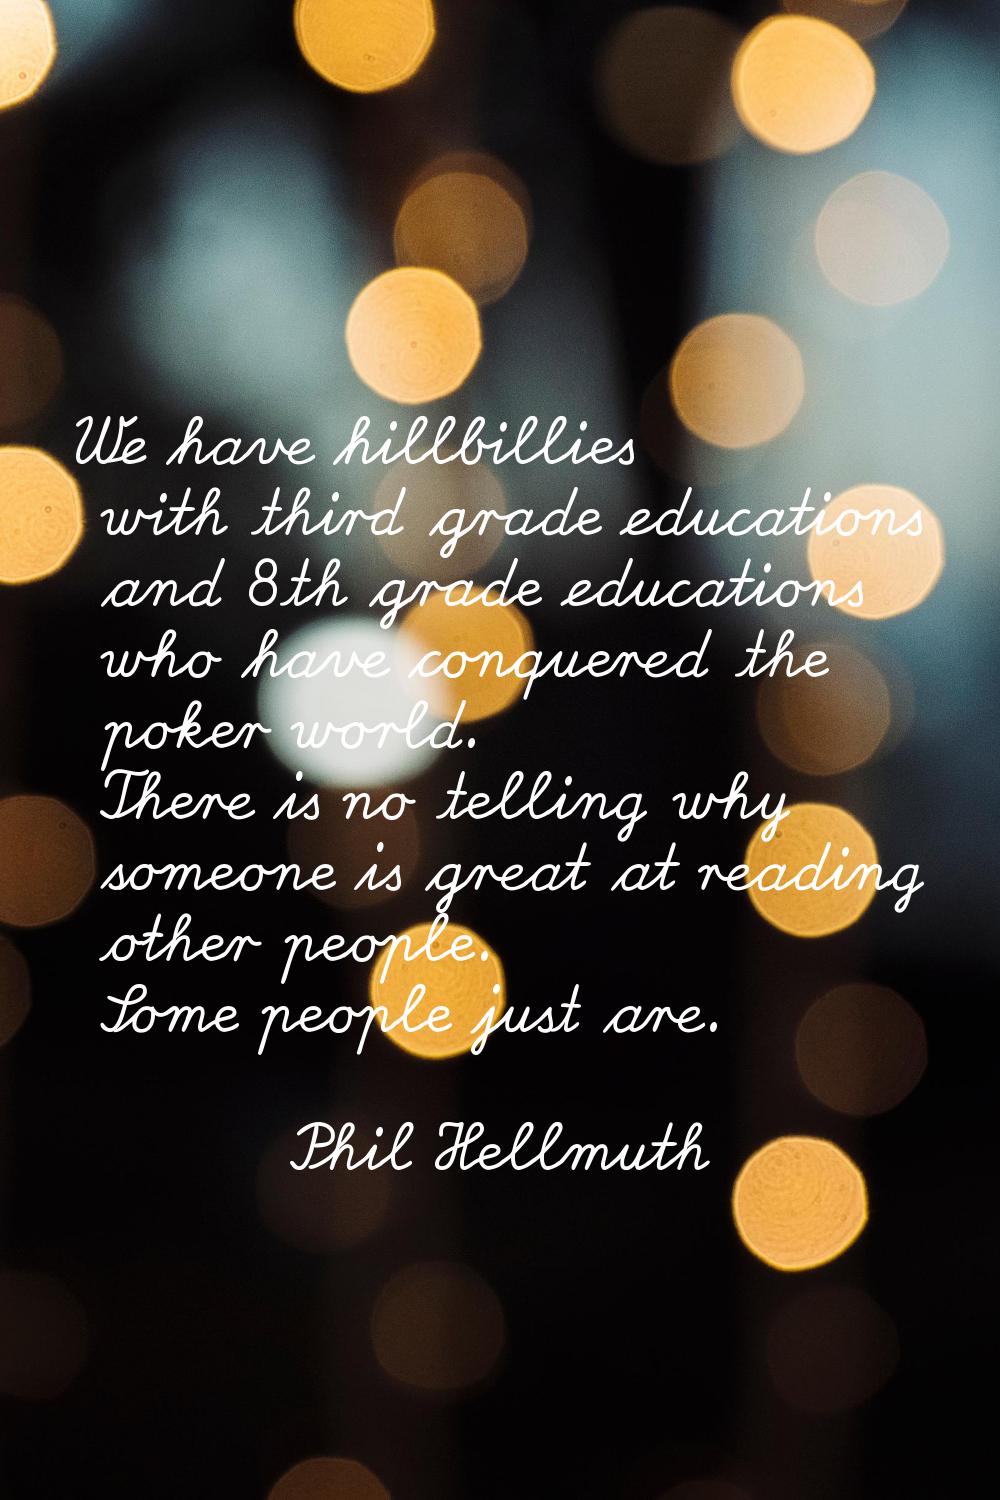 We have hillbillies with third grade educations and 8th grade educations who have conquered the pok